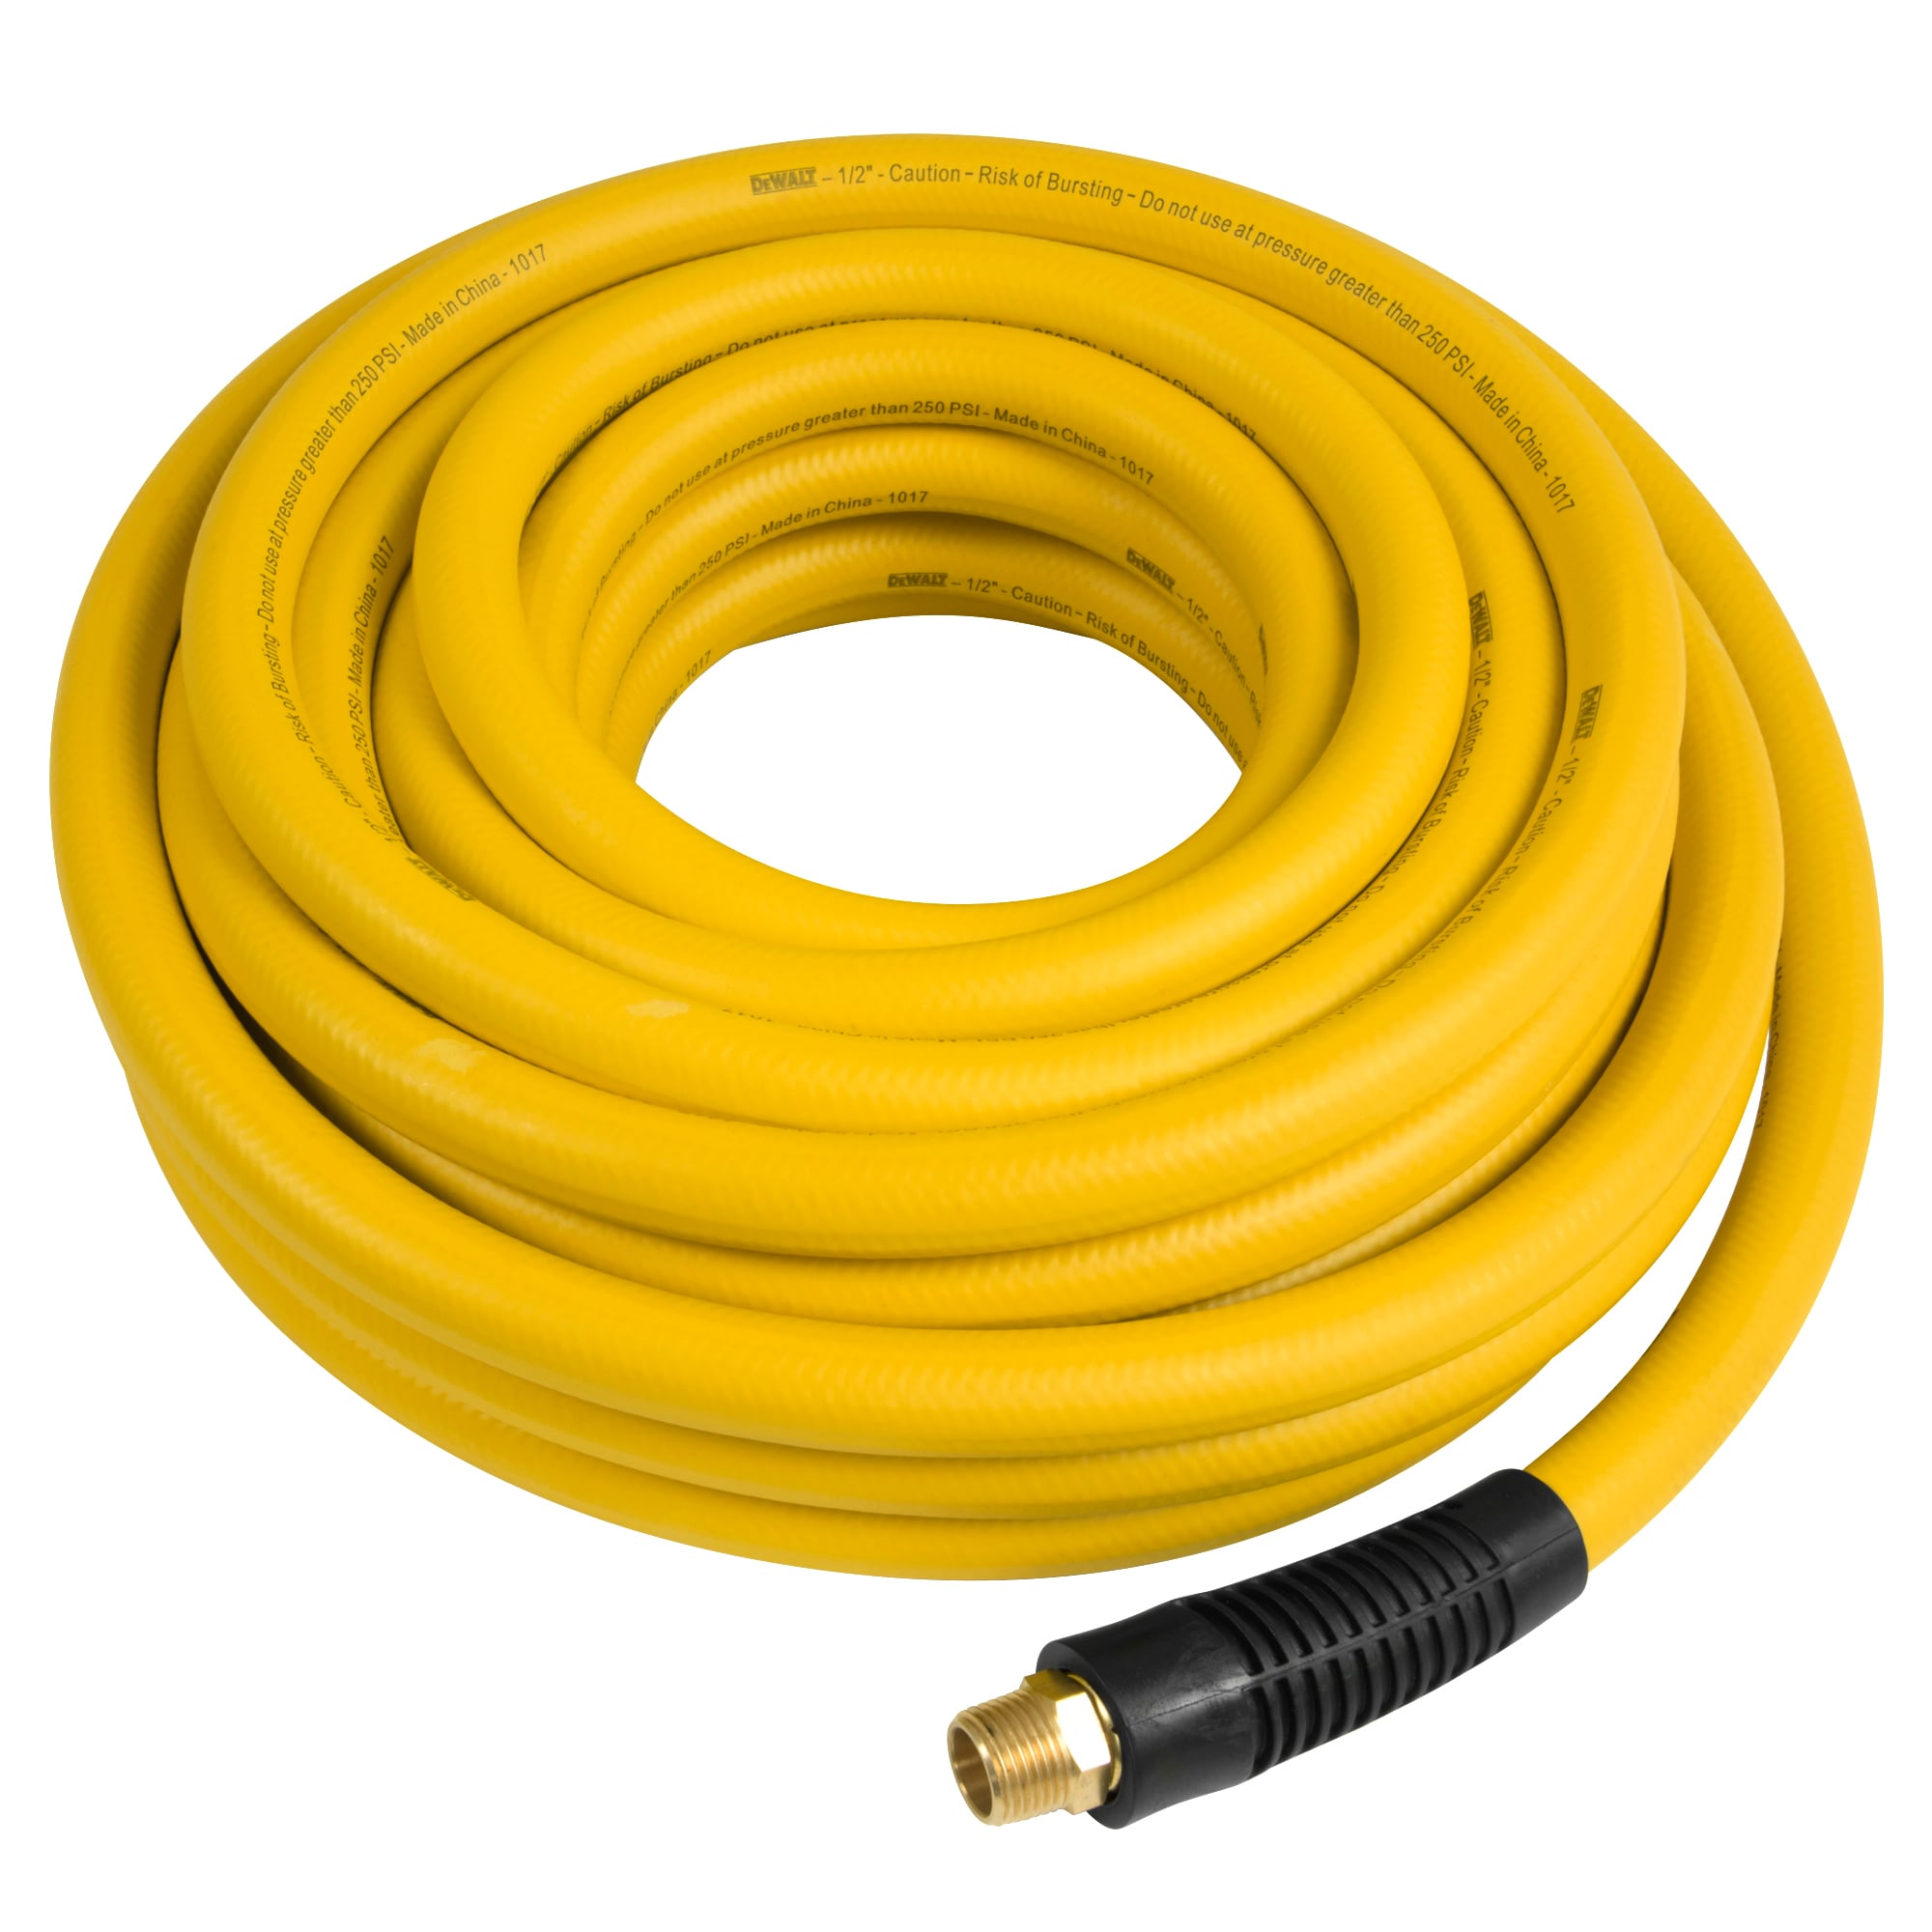 Abbott Rubber Contractor Grade Piliable Air Hose 1/2 in ID x 3/4 in x 50 ft L, 